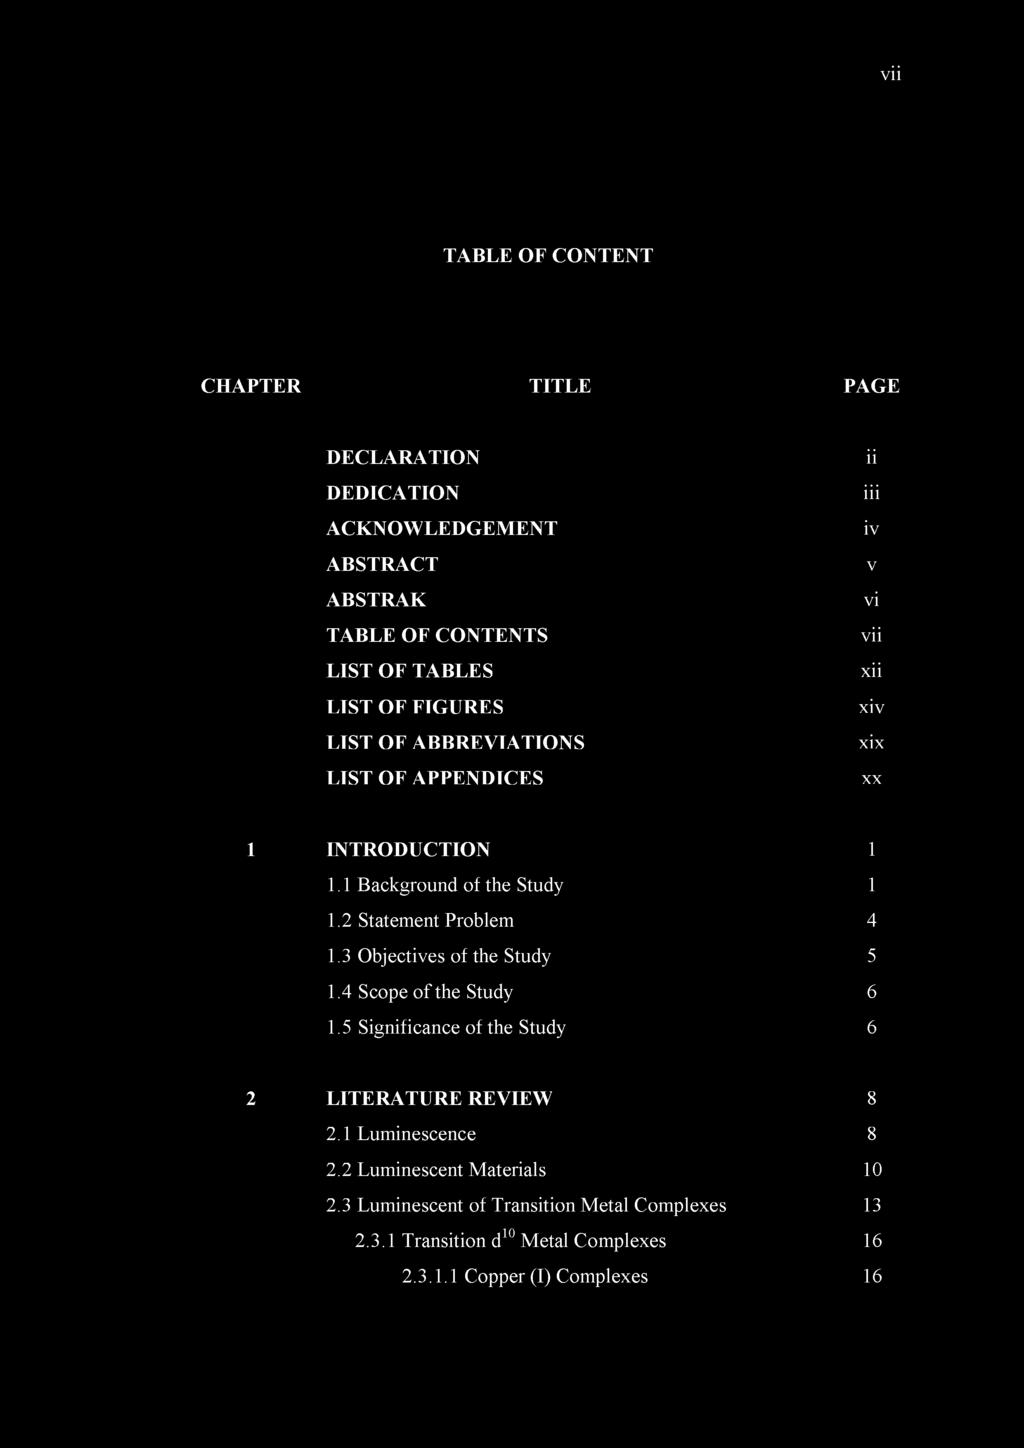 vii TABLE OF CONTENT CHAPTER TITLE PAGE DECLARATION DEDICATION ACKNOW LEDGEMENT ABSTRACT ABSTRAK TABLE OF CONTENTS LIST OF TABLES LIST OF FIGURES LIST OF ABBREVIATIONS LIST OF APPENDICES ii iii iv v